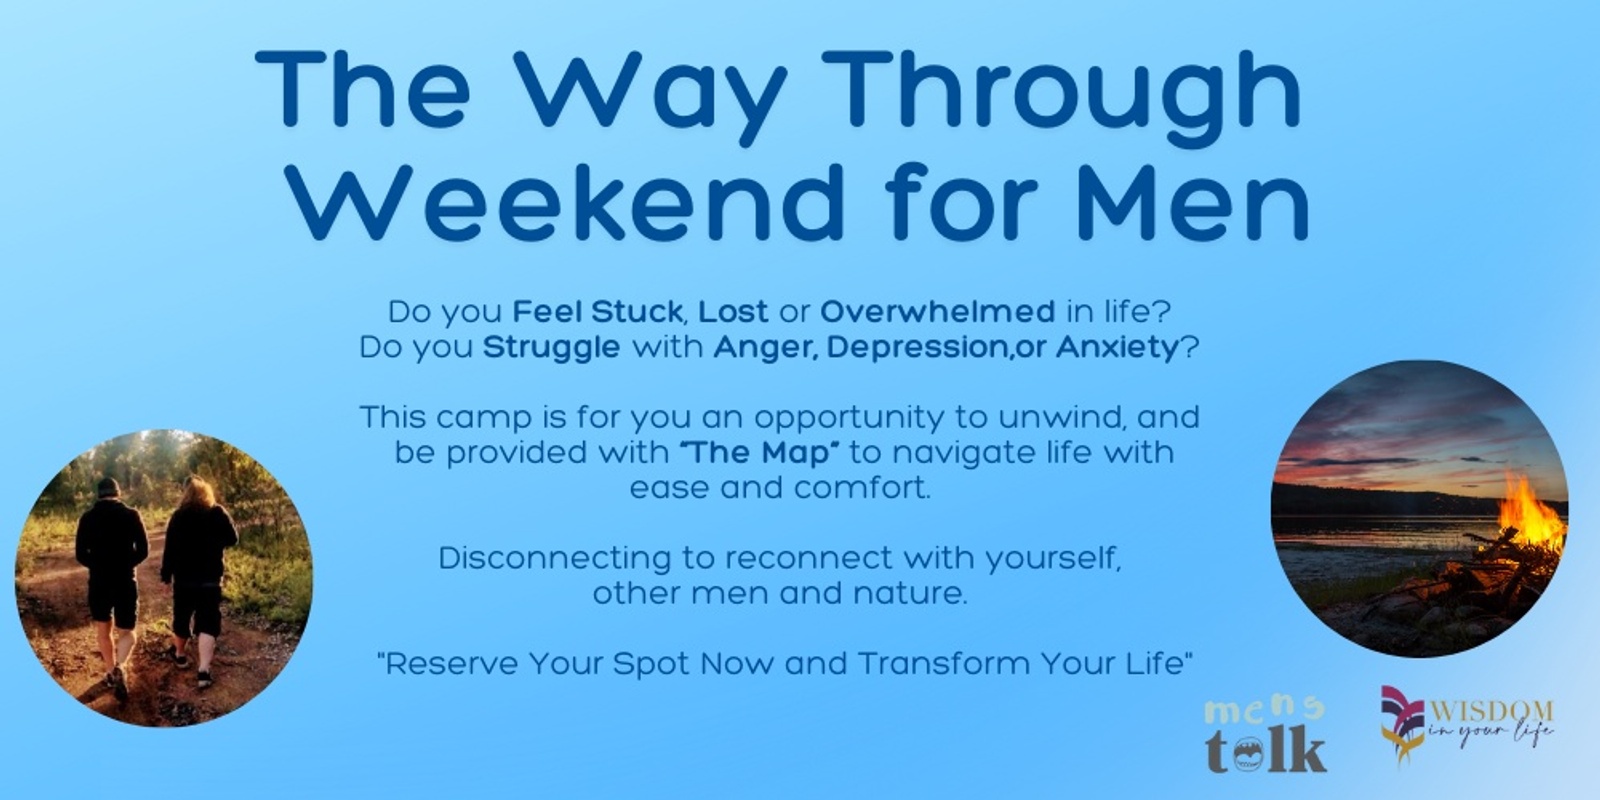 Banner image for The Way Through Weekend for Men: Unwind, Reconnect, and Transform Your Life.